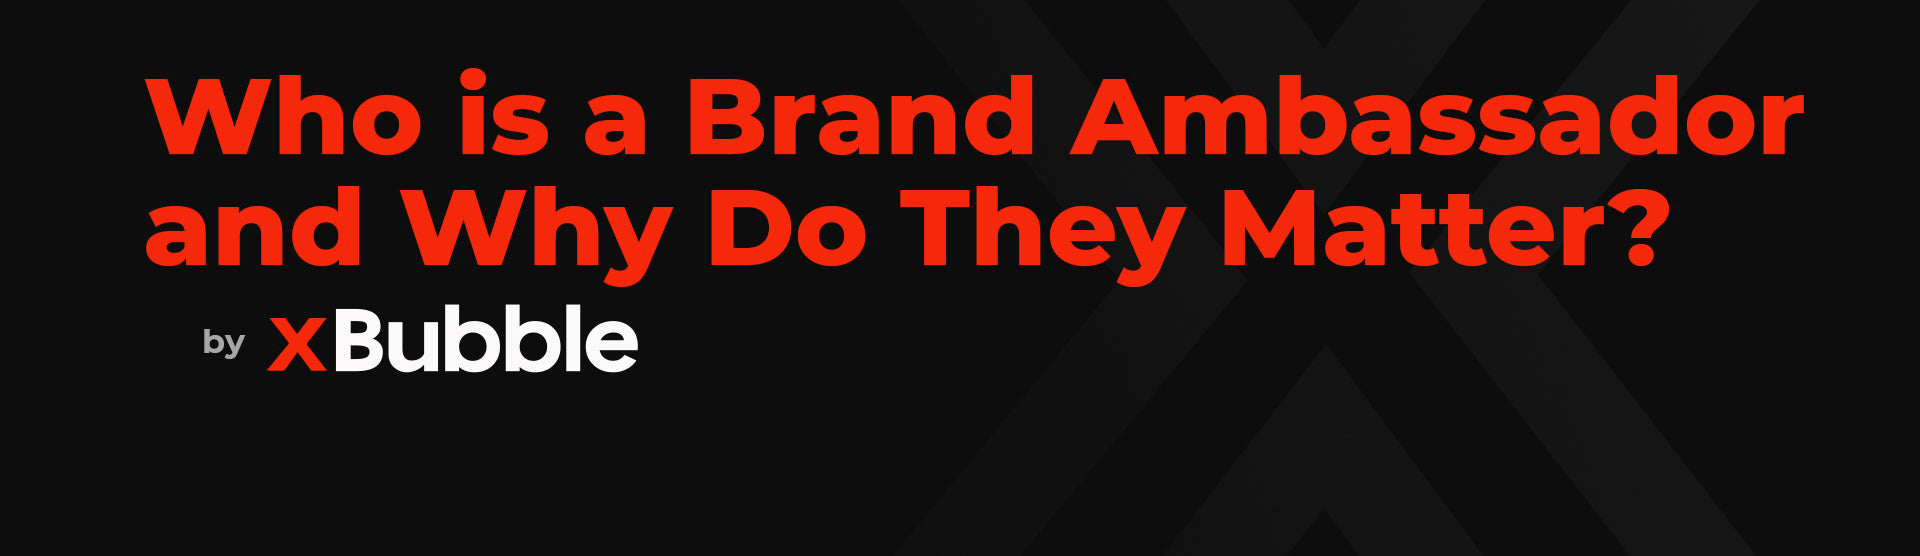 The Brand Ambassador: Who Are They And Why Do They Matter?